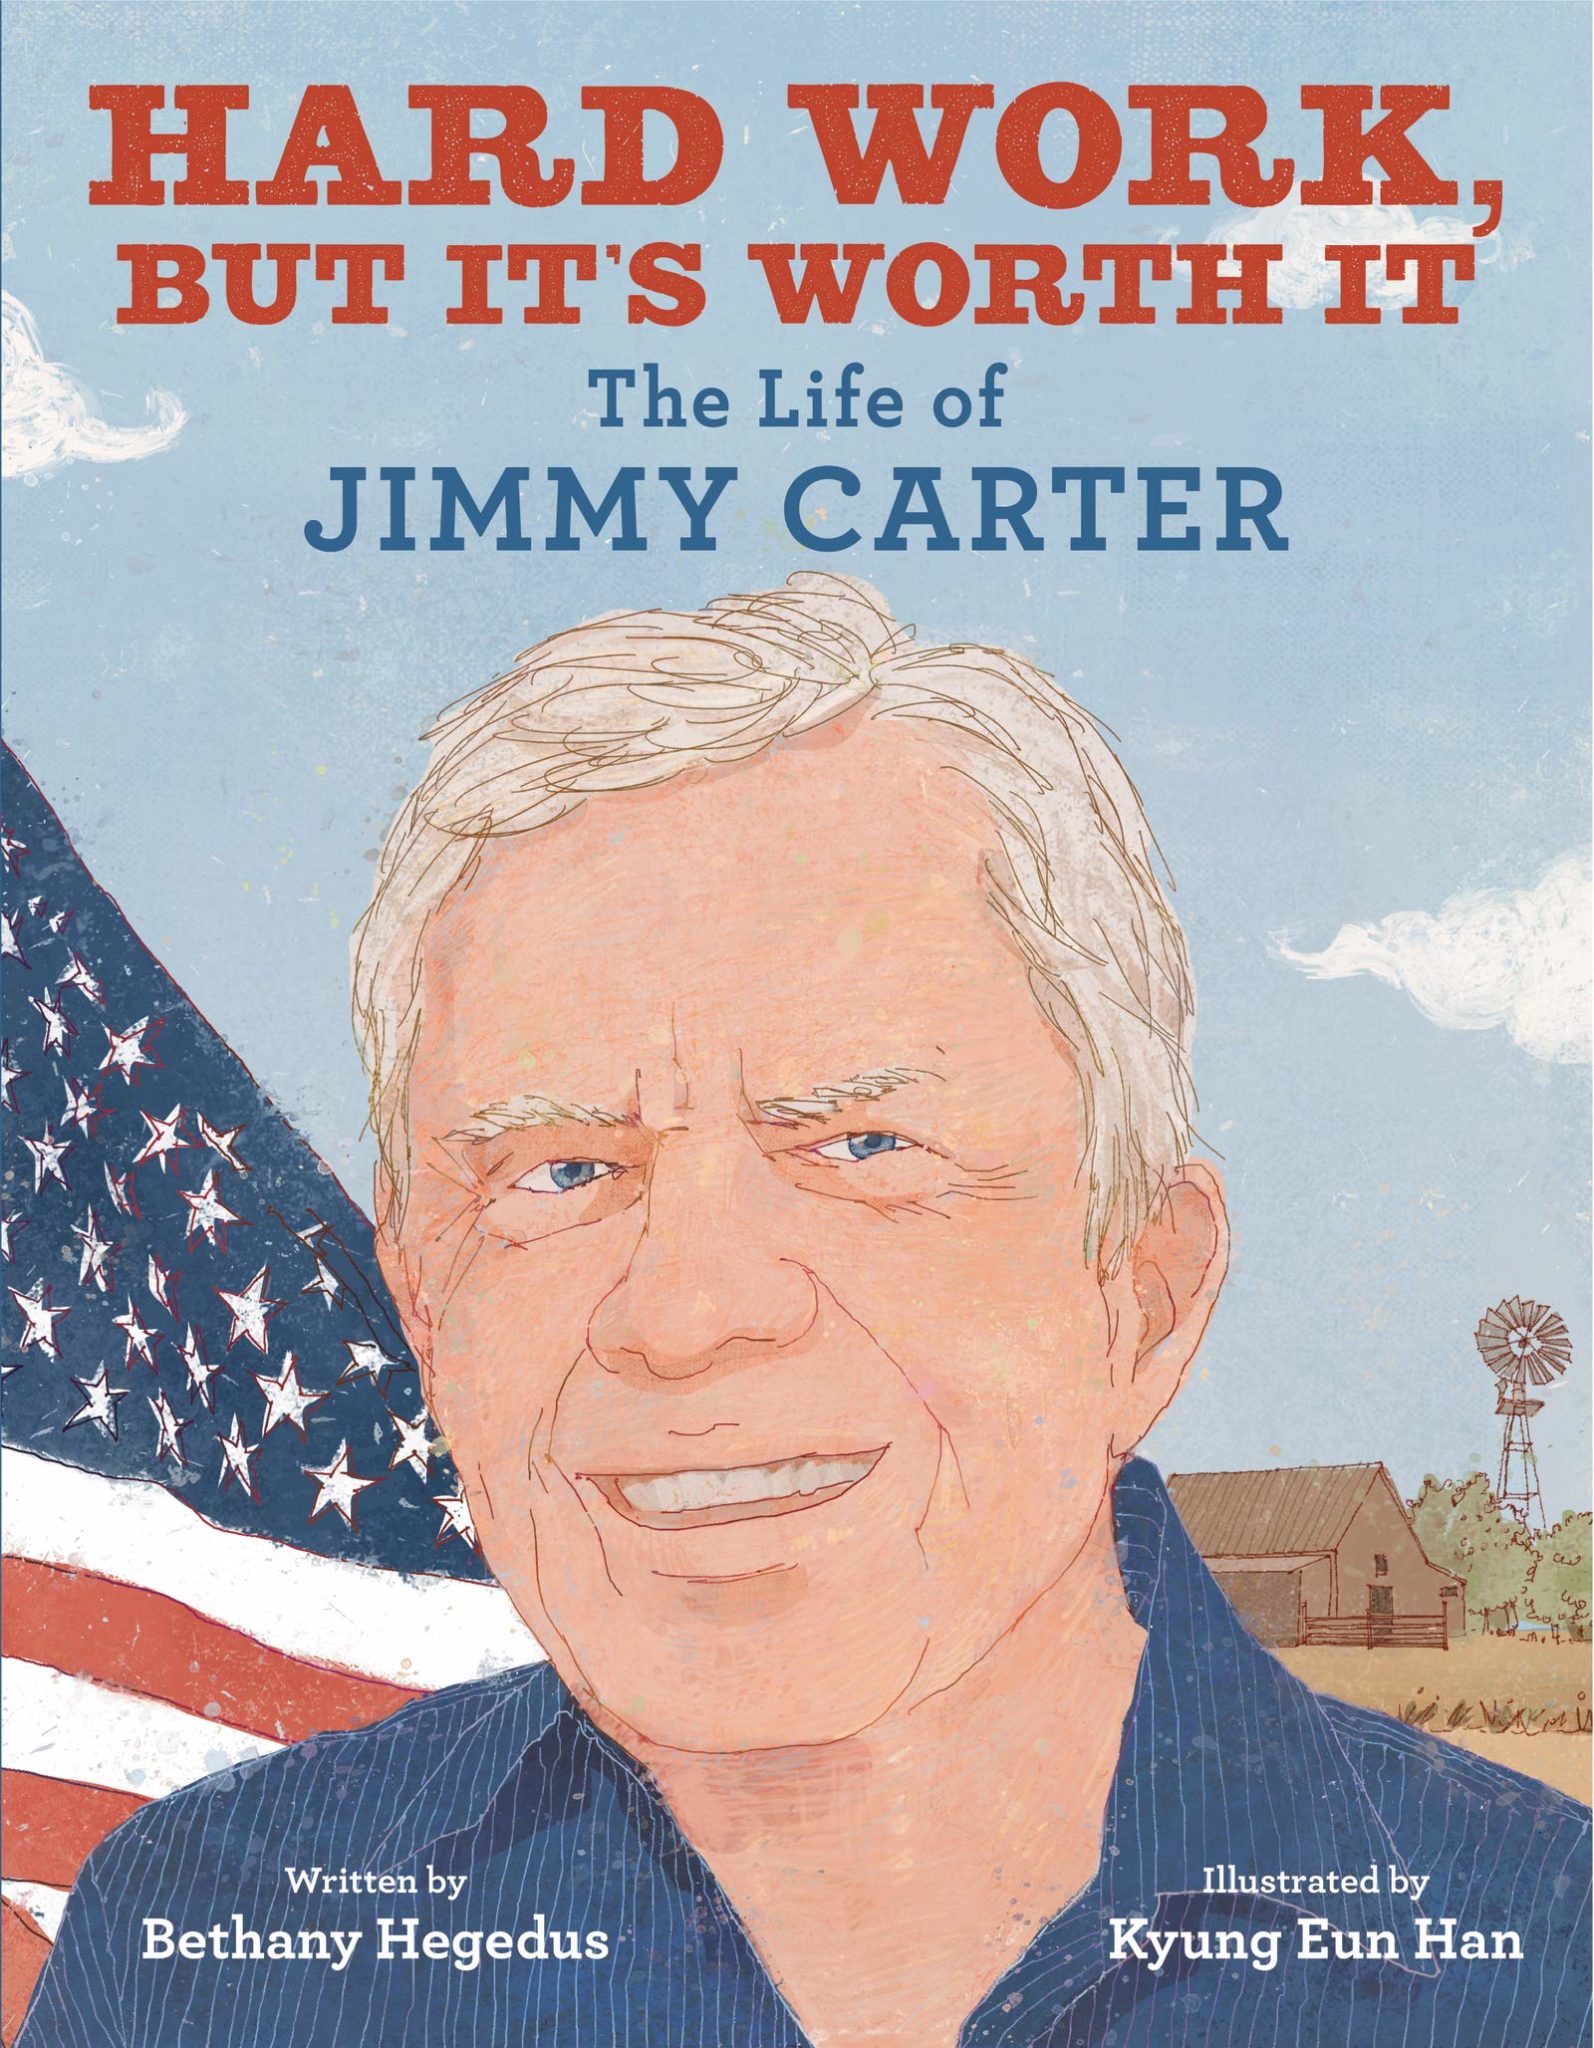 "Hard Work, but It's Worth It: The Life of Jimmy Carter"